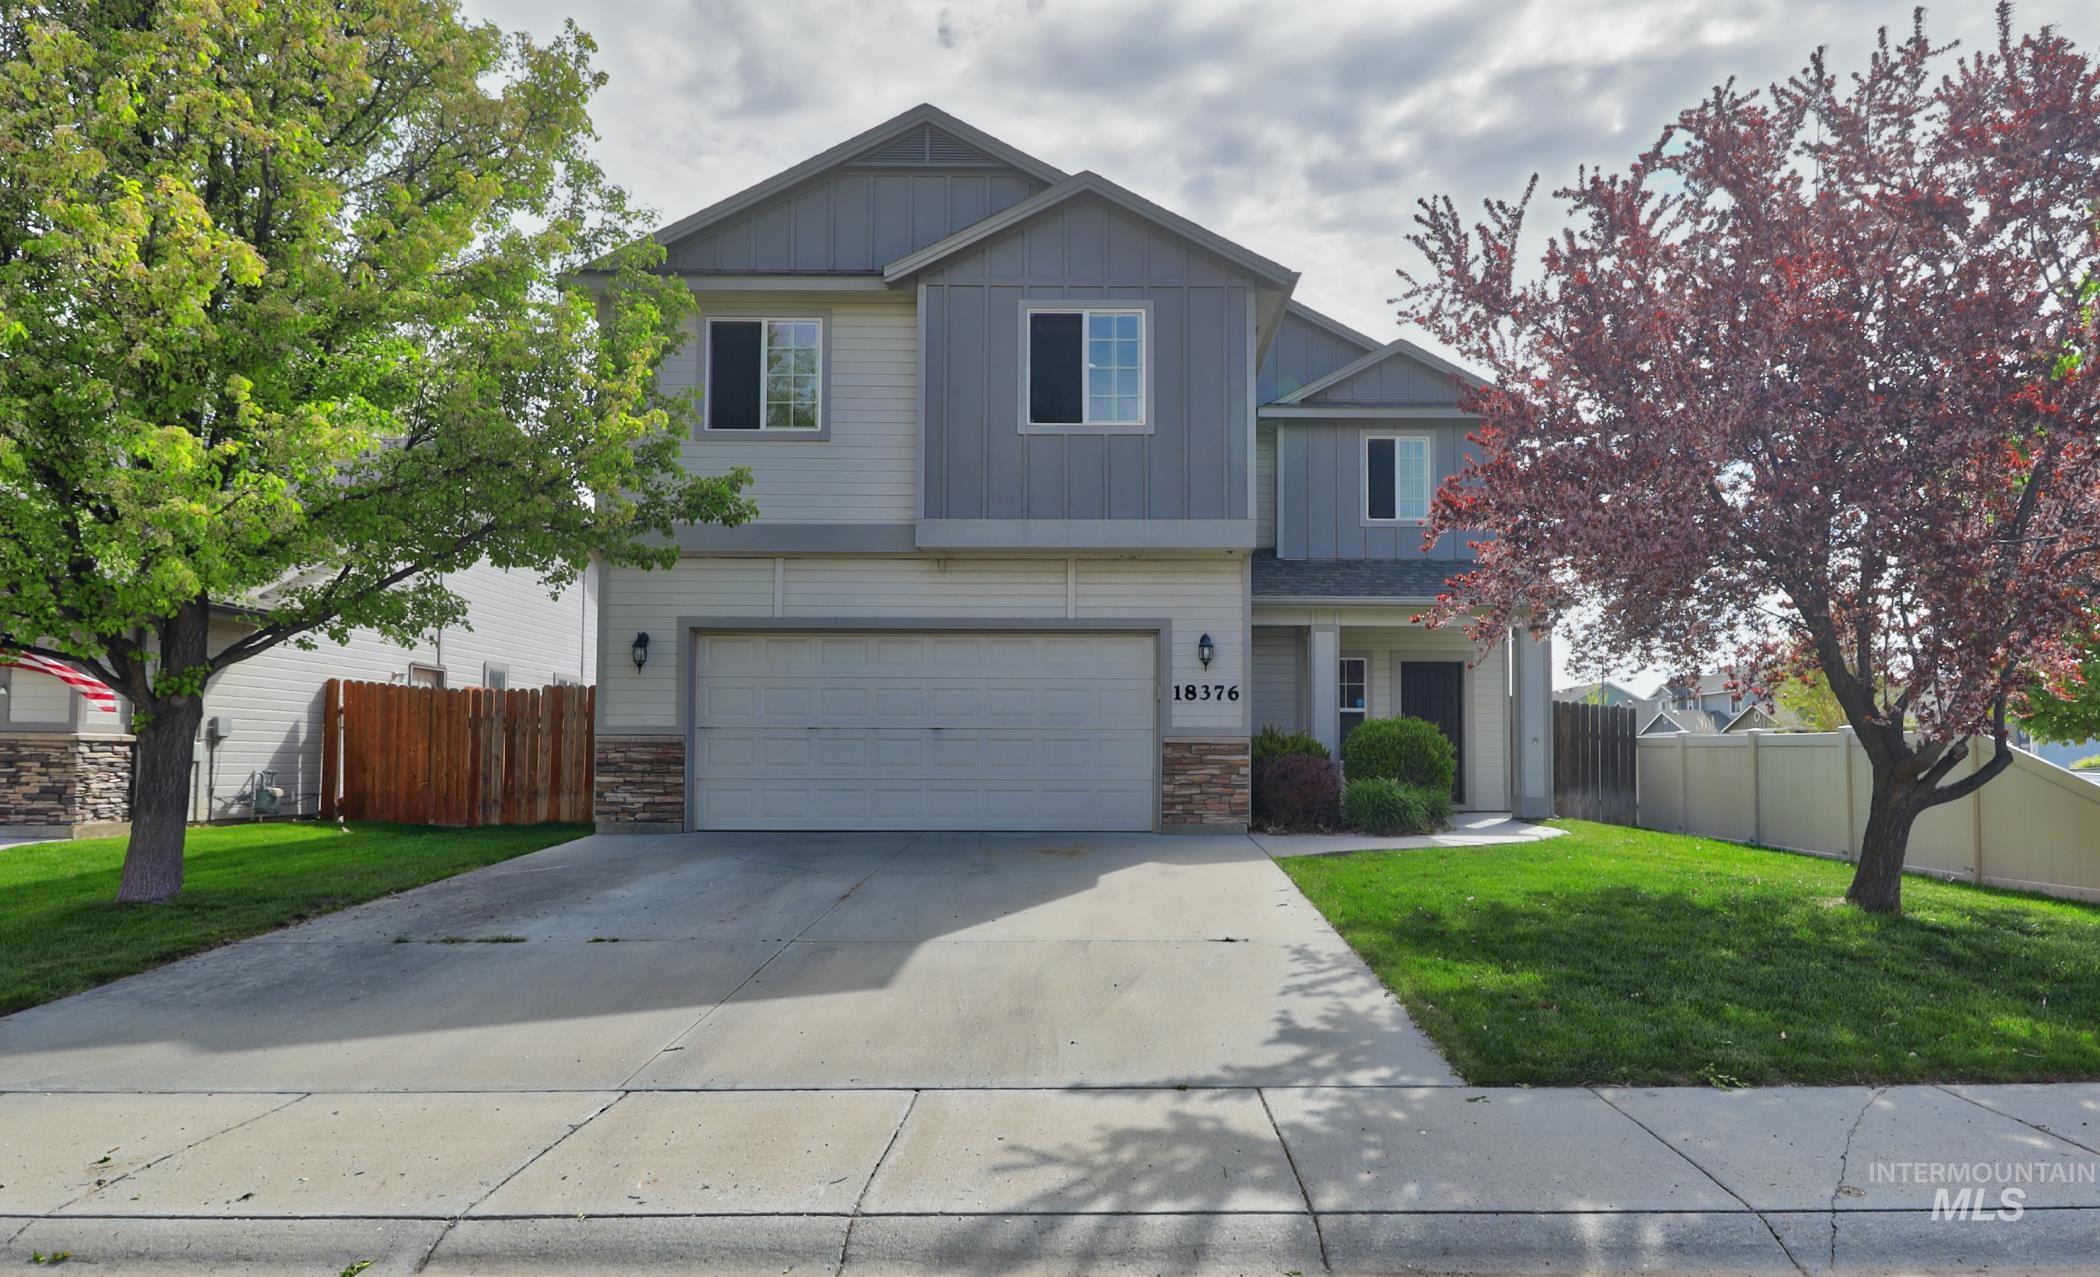 18376 Spicebush Ave, Nampa, Idaho 83687, 4 Bedrooms, 2.5 Bathrooms, Residential For Sale, Price $429,000,MLS 98908010